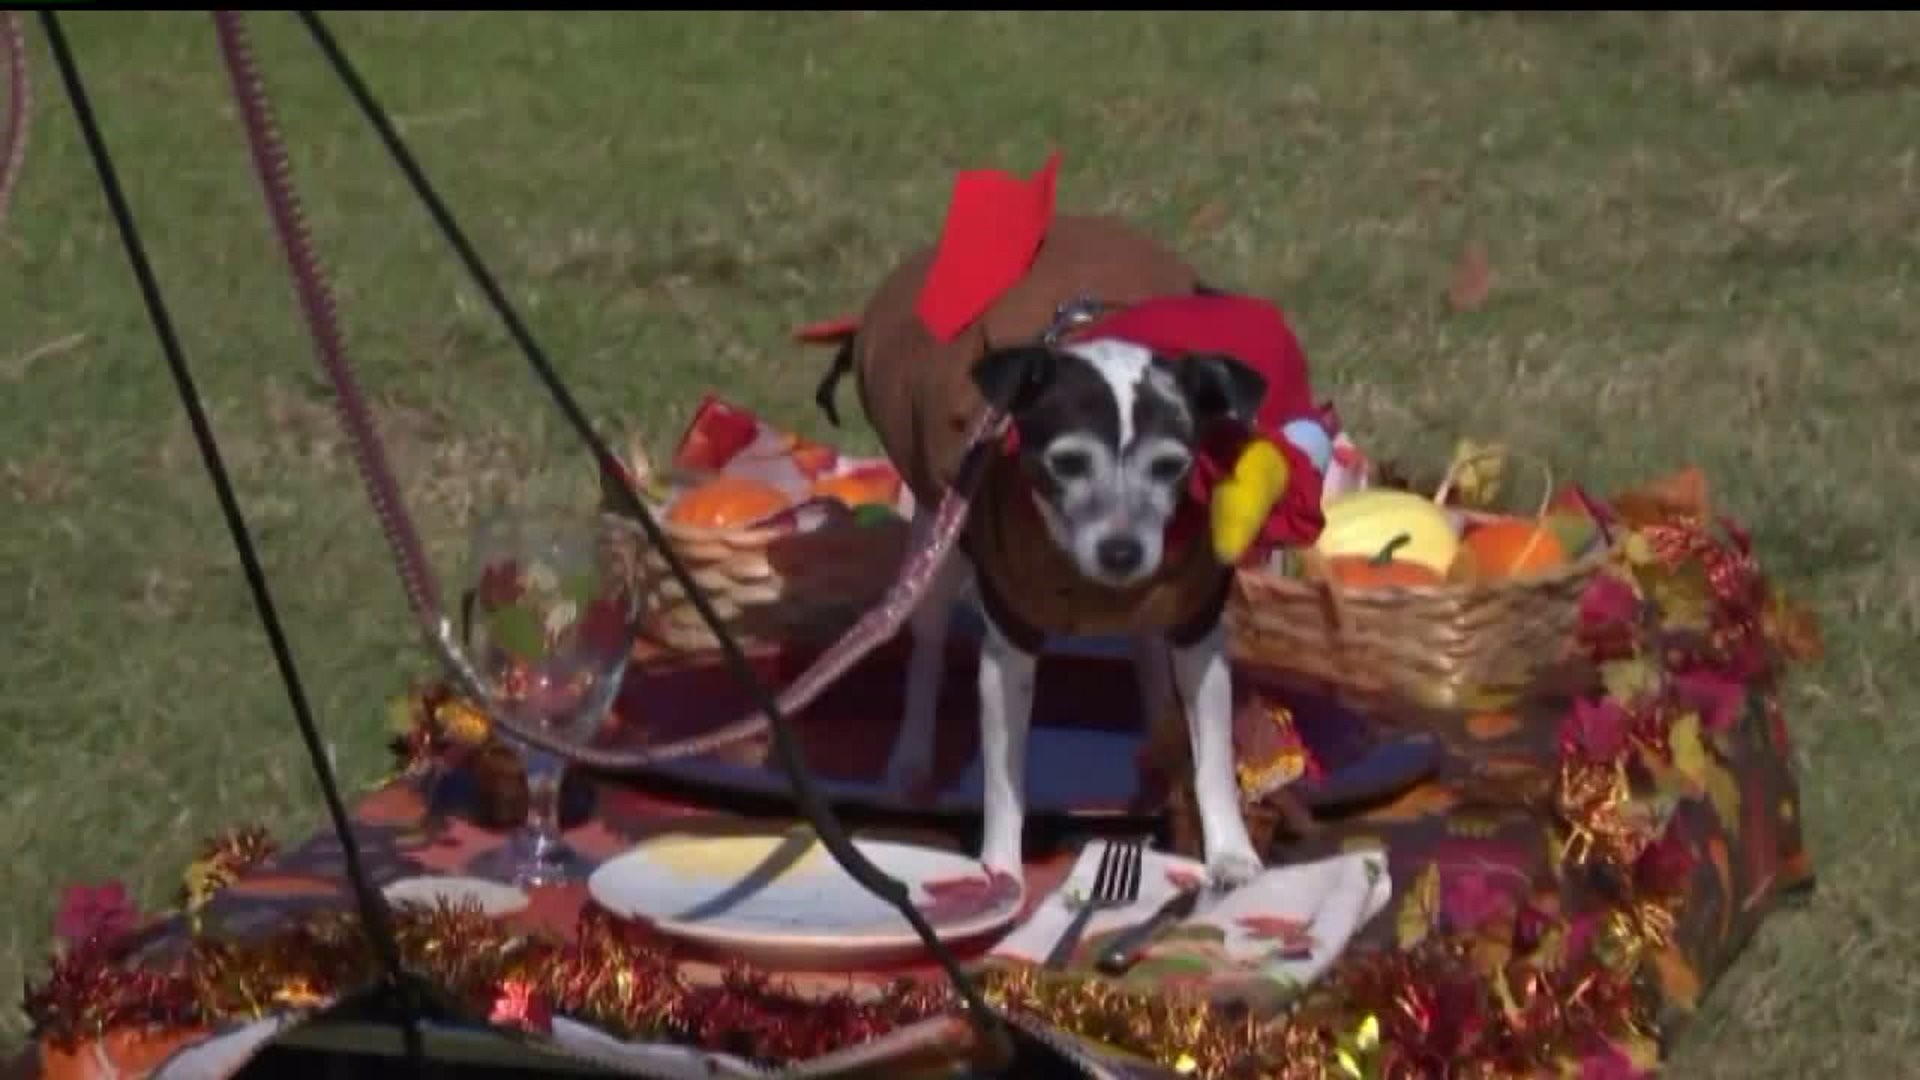 Animal emergency center in York County gives tips on keeping pets safe on Halloween